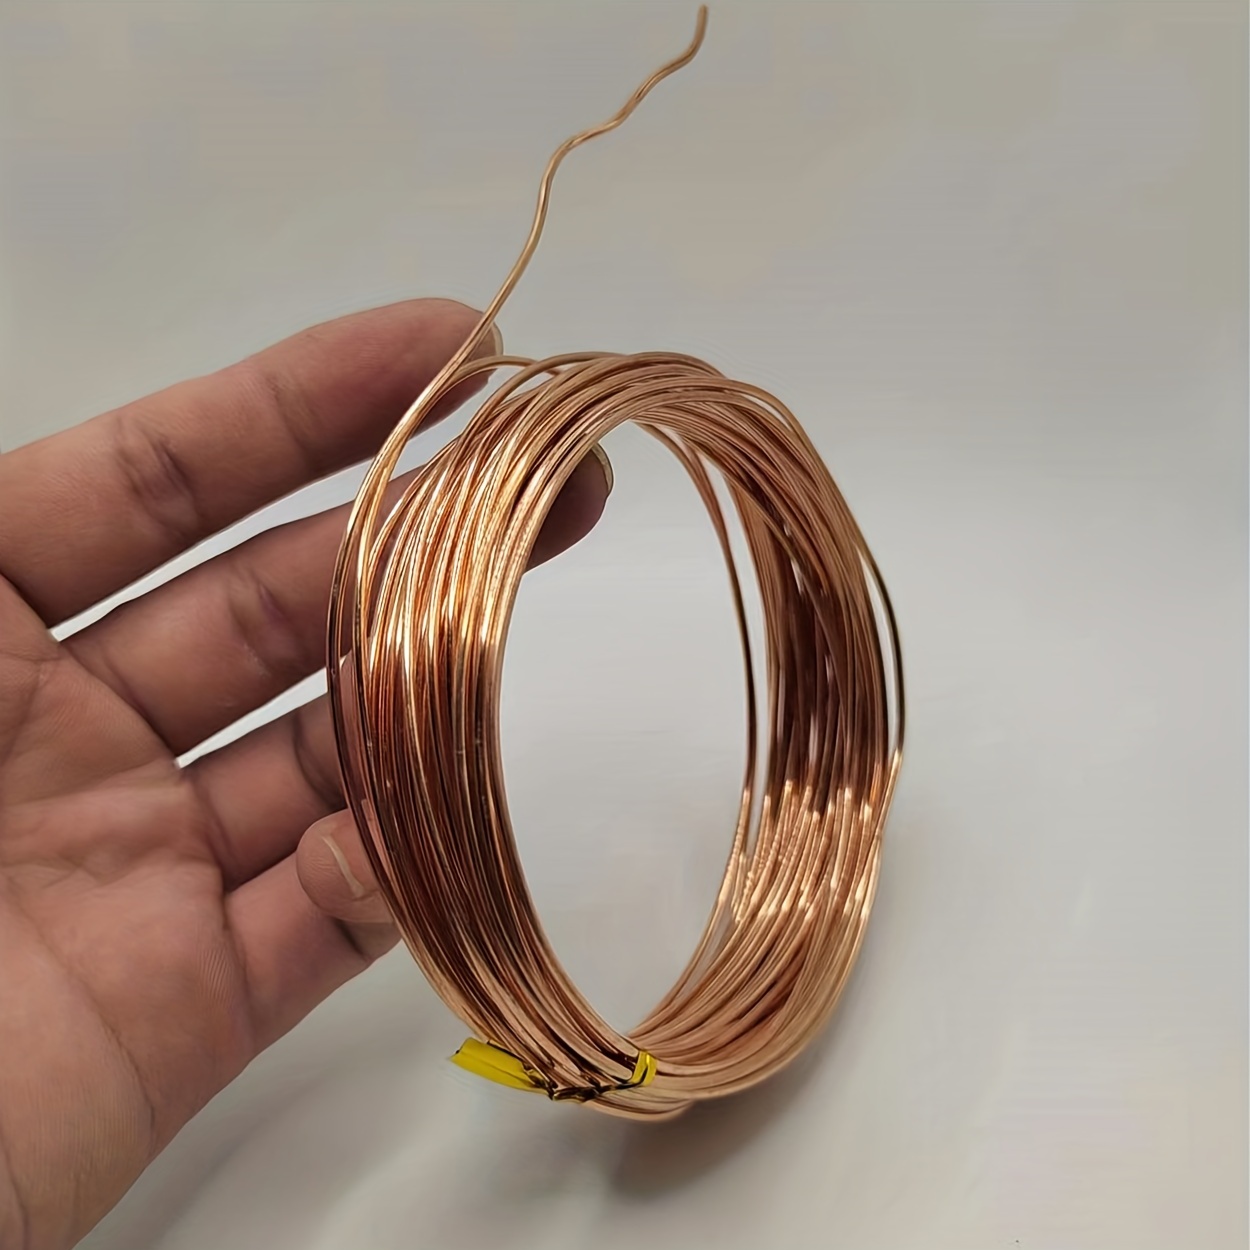 18 Gauge Pure Copper Wire Length Soft Wire Length Solid Bare